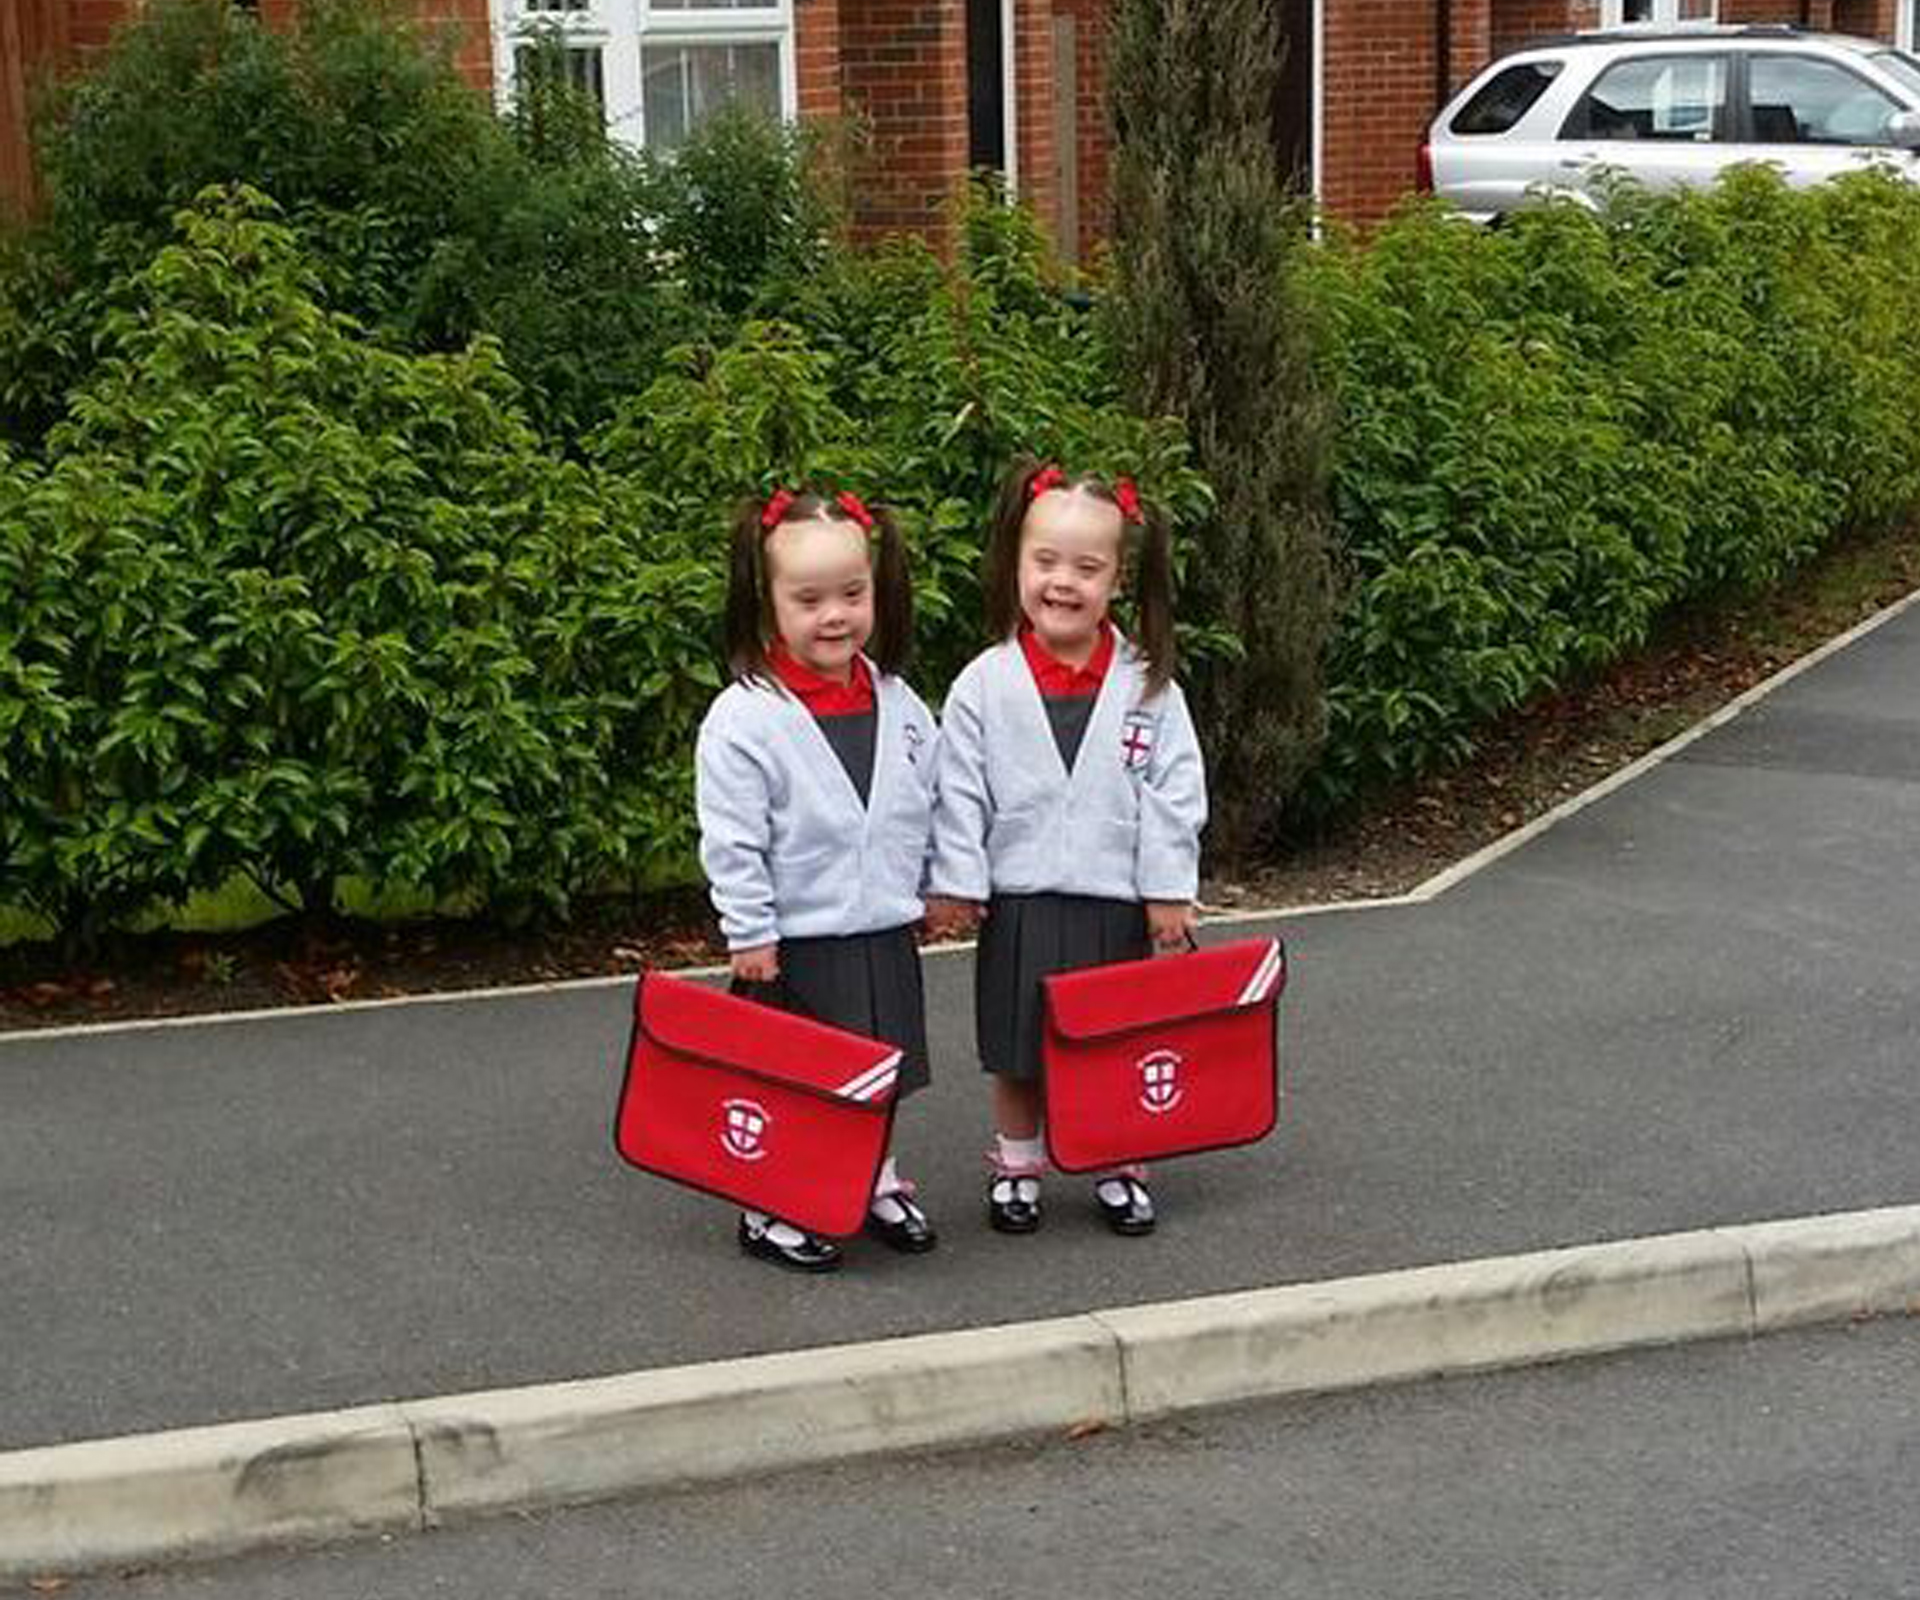 Double the joy! Twin girls with Down syndrome start school